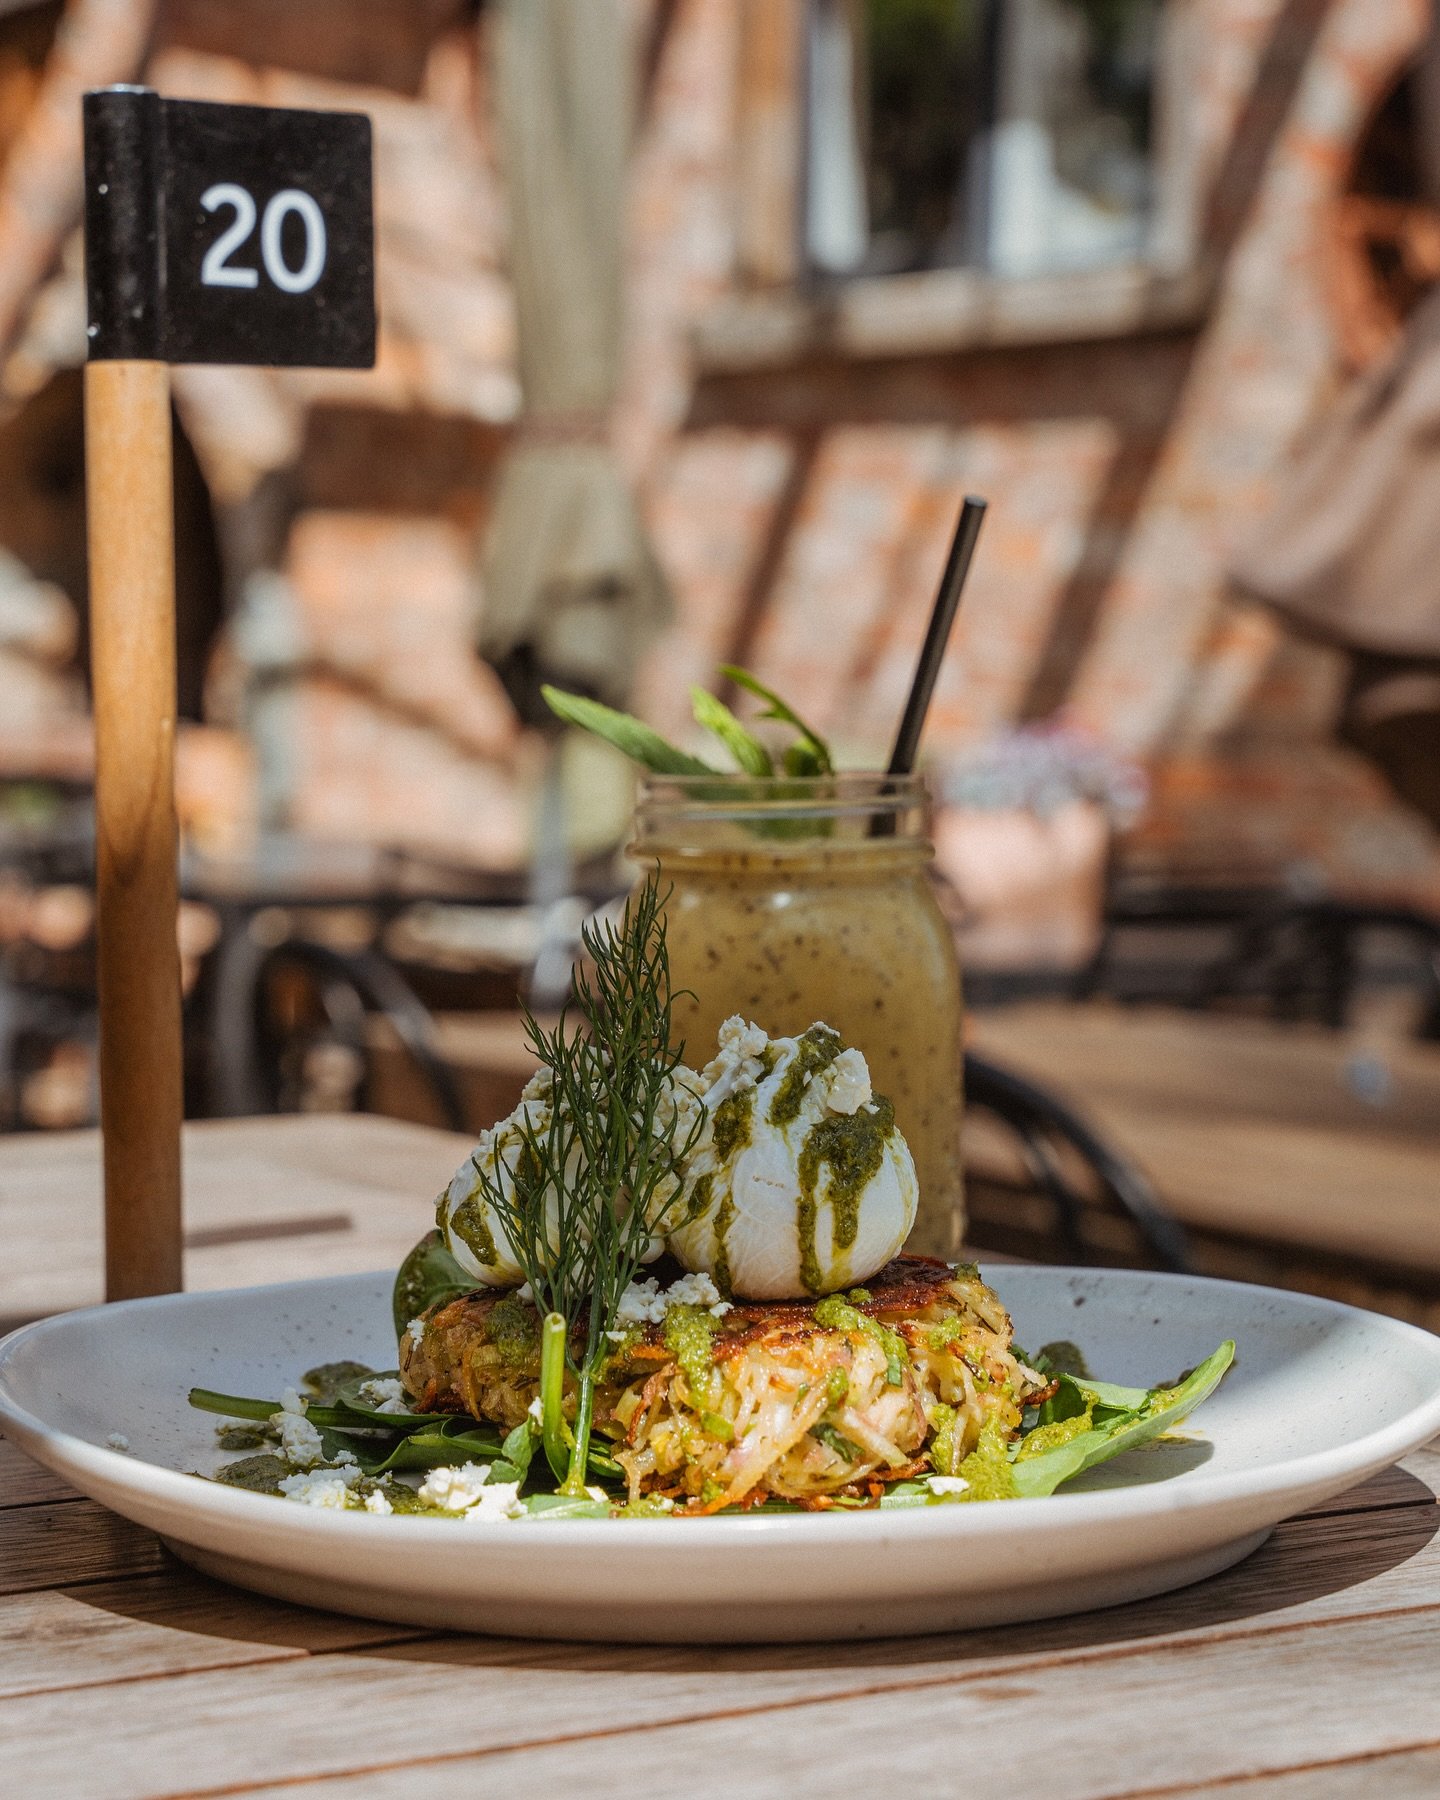 TABLE 20 GOT IT RIGHT 👏 
The sun is shining and warming up our courtyard this morning! We can&rsquo;t think of a better place to fuel up for a Sunday Funday!